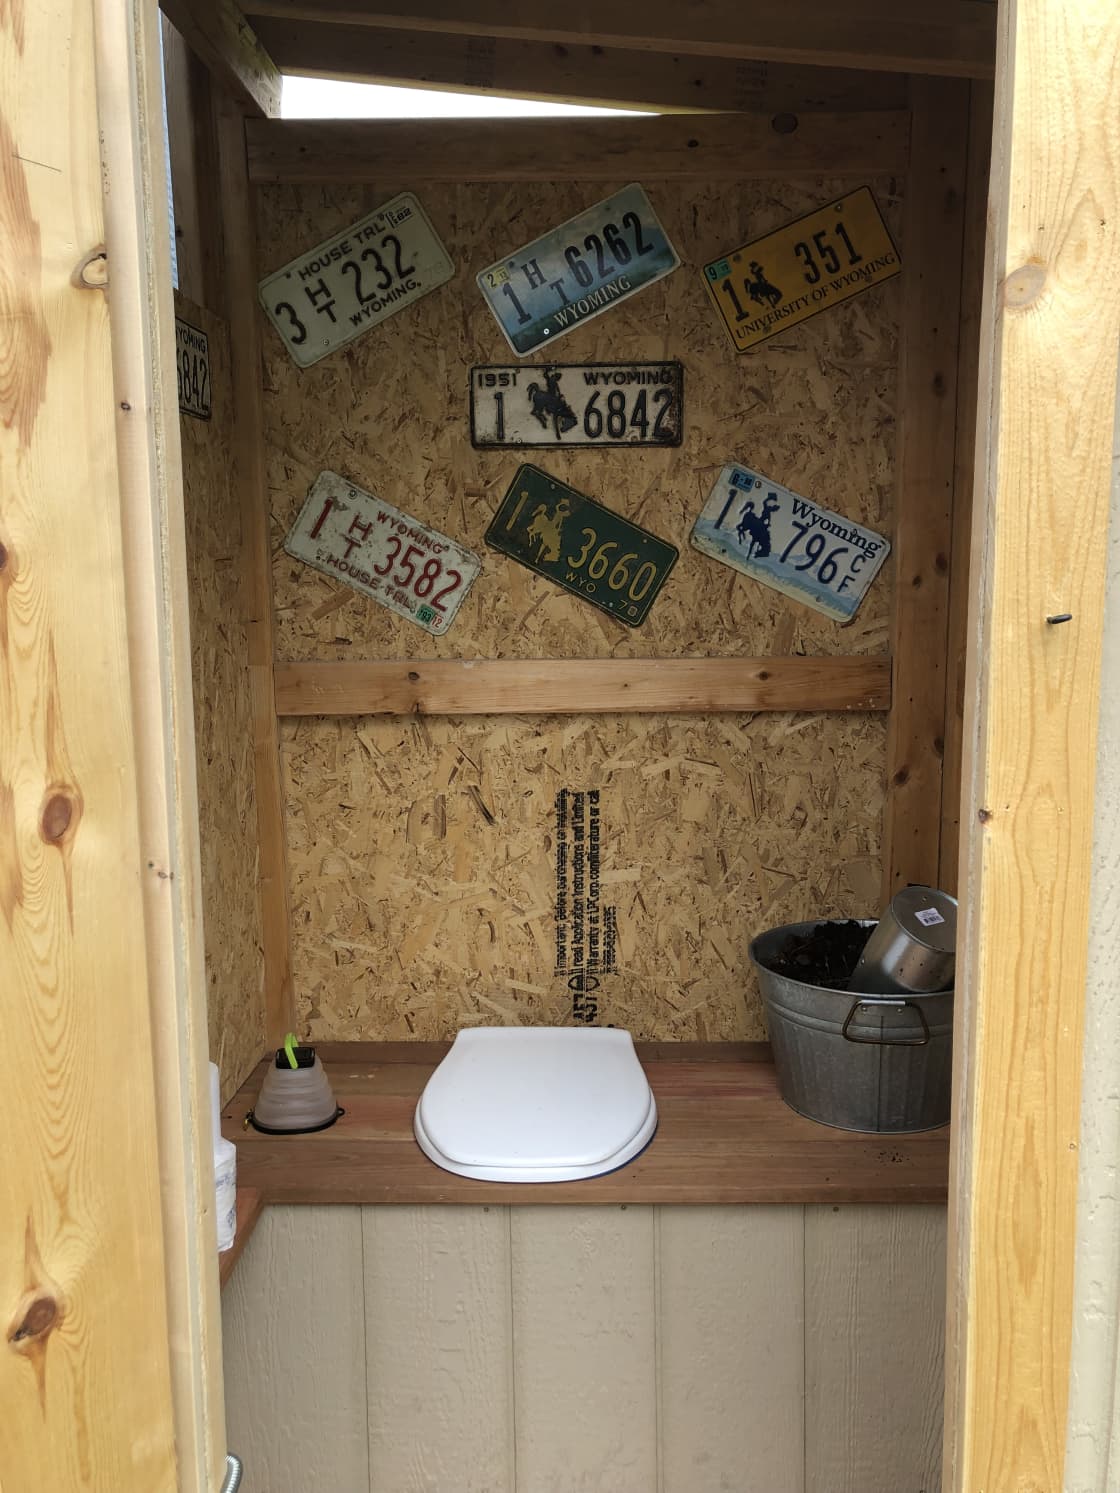 Composting toilet. Please take a seat. Add a little scoop to the bucket if you added solid waste.